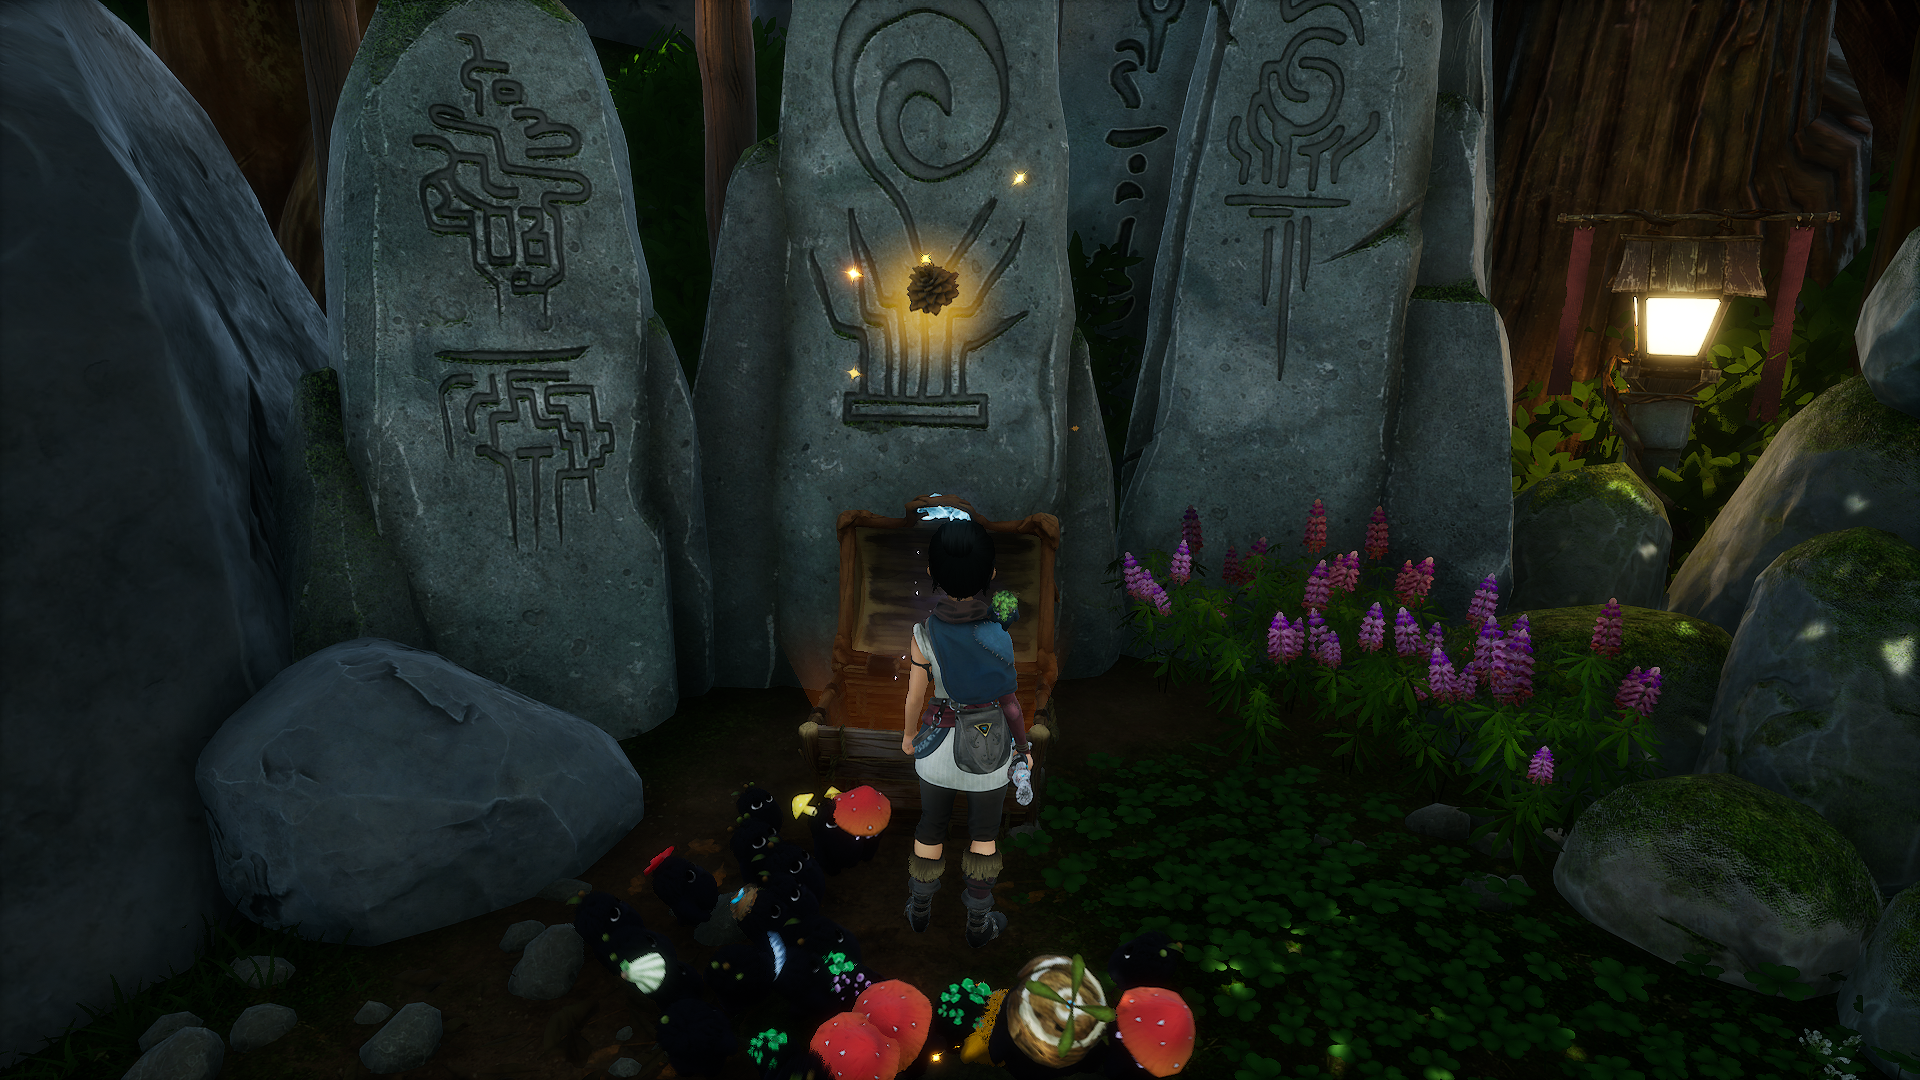 Kena finds the Pinecone hat in a chest among some obelisks 